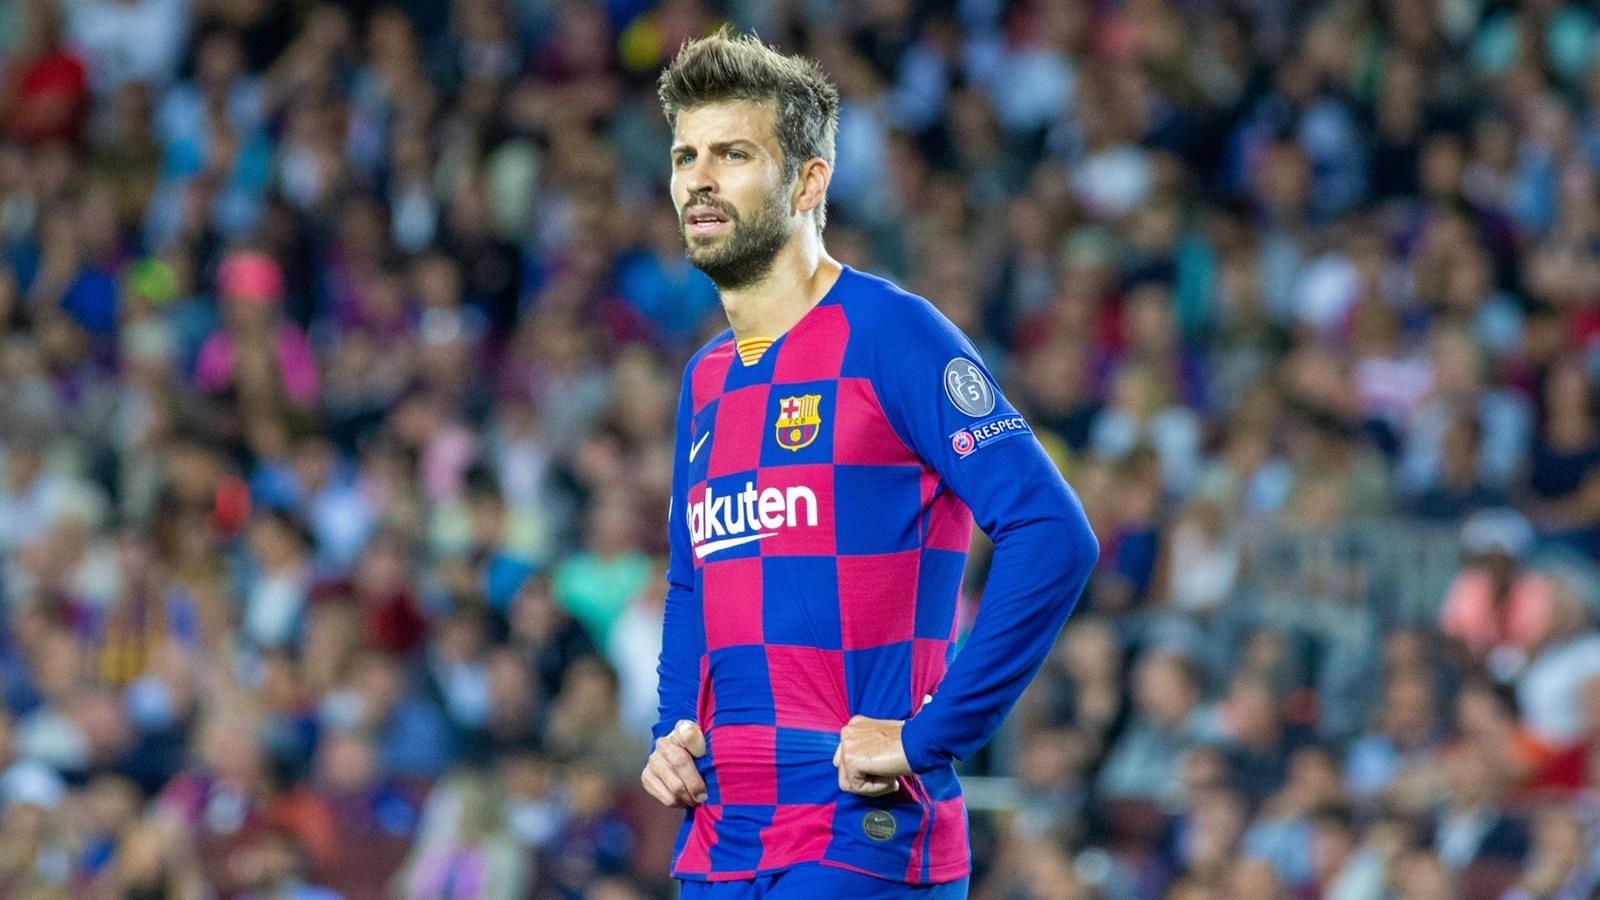 Pique Worried about Real Madrid Catching Up to Barcelona after Bad Match